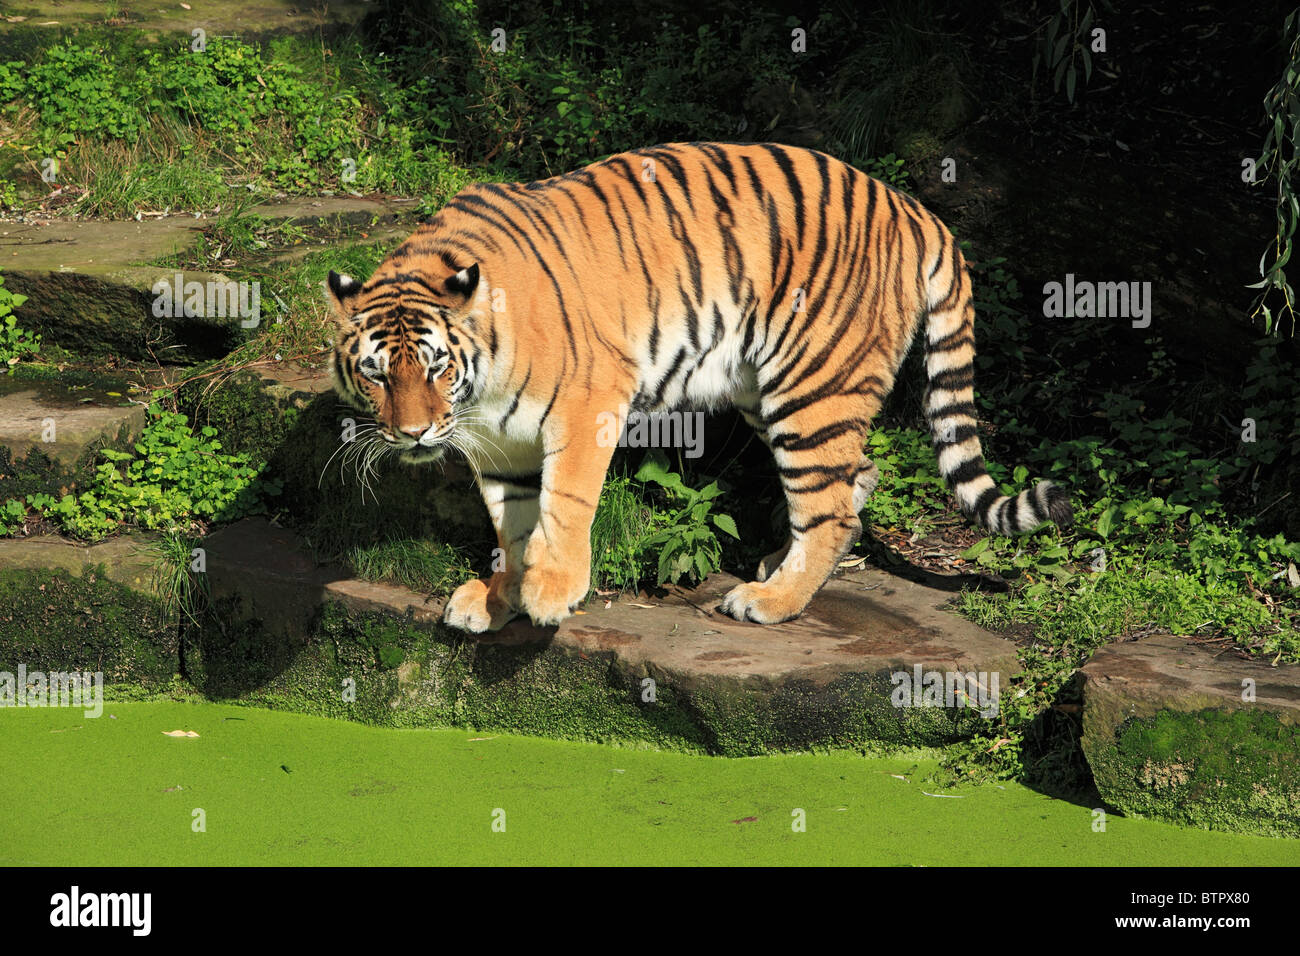 Siberian Tiger, Panthera tigris altaica, zoological gardens, all-weather zoo in Muenster, D-Muenster, Westphalia, Muensterland, North Rhine-Westphalia Stock Photo